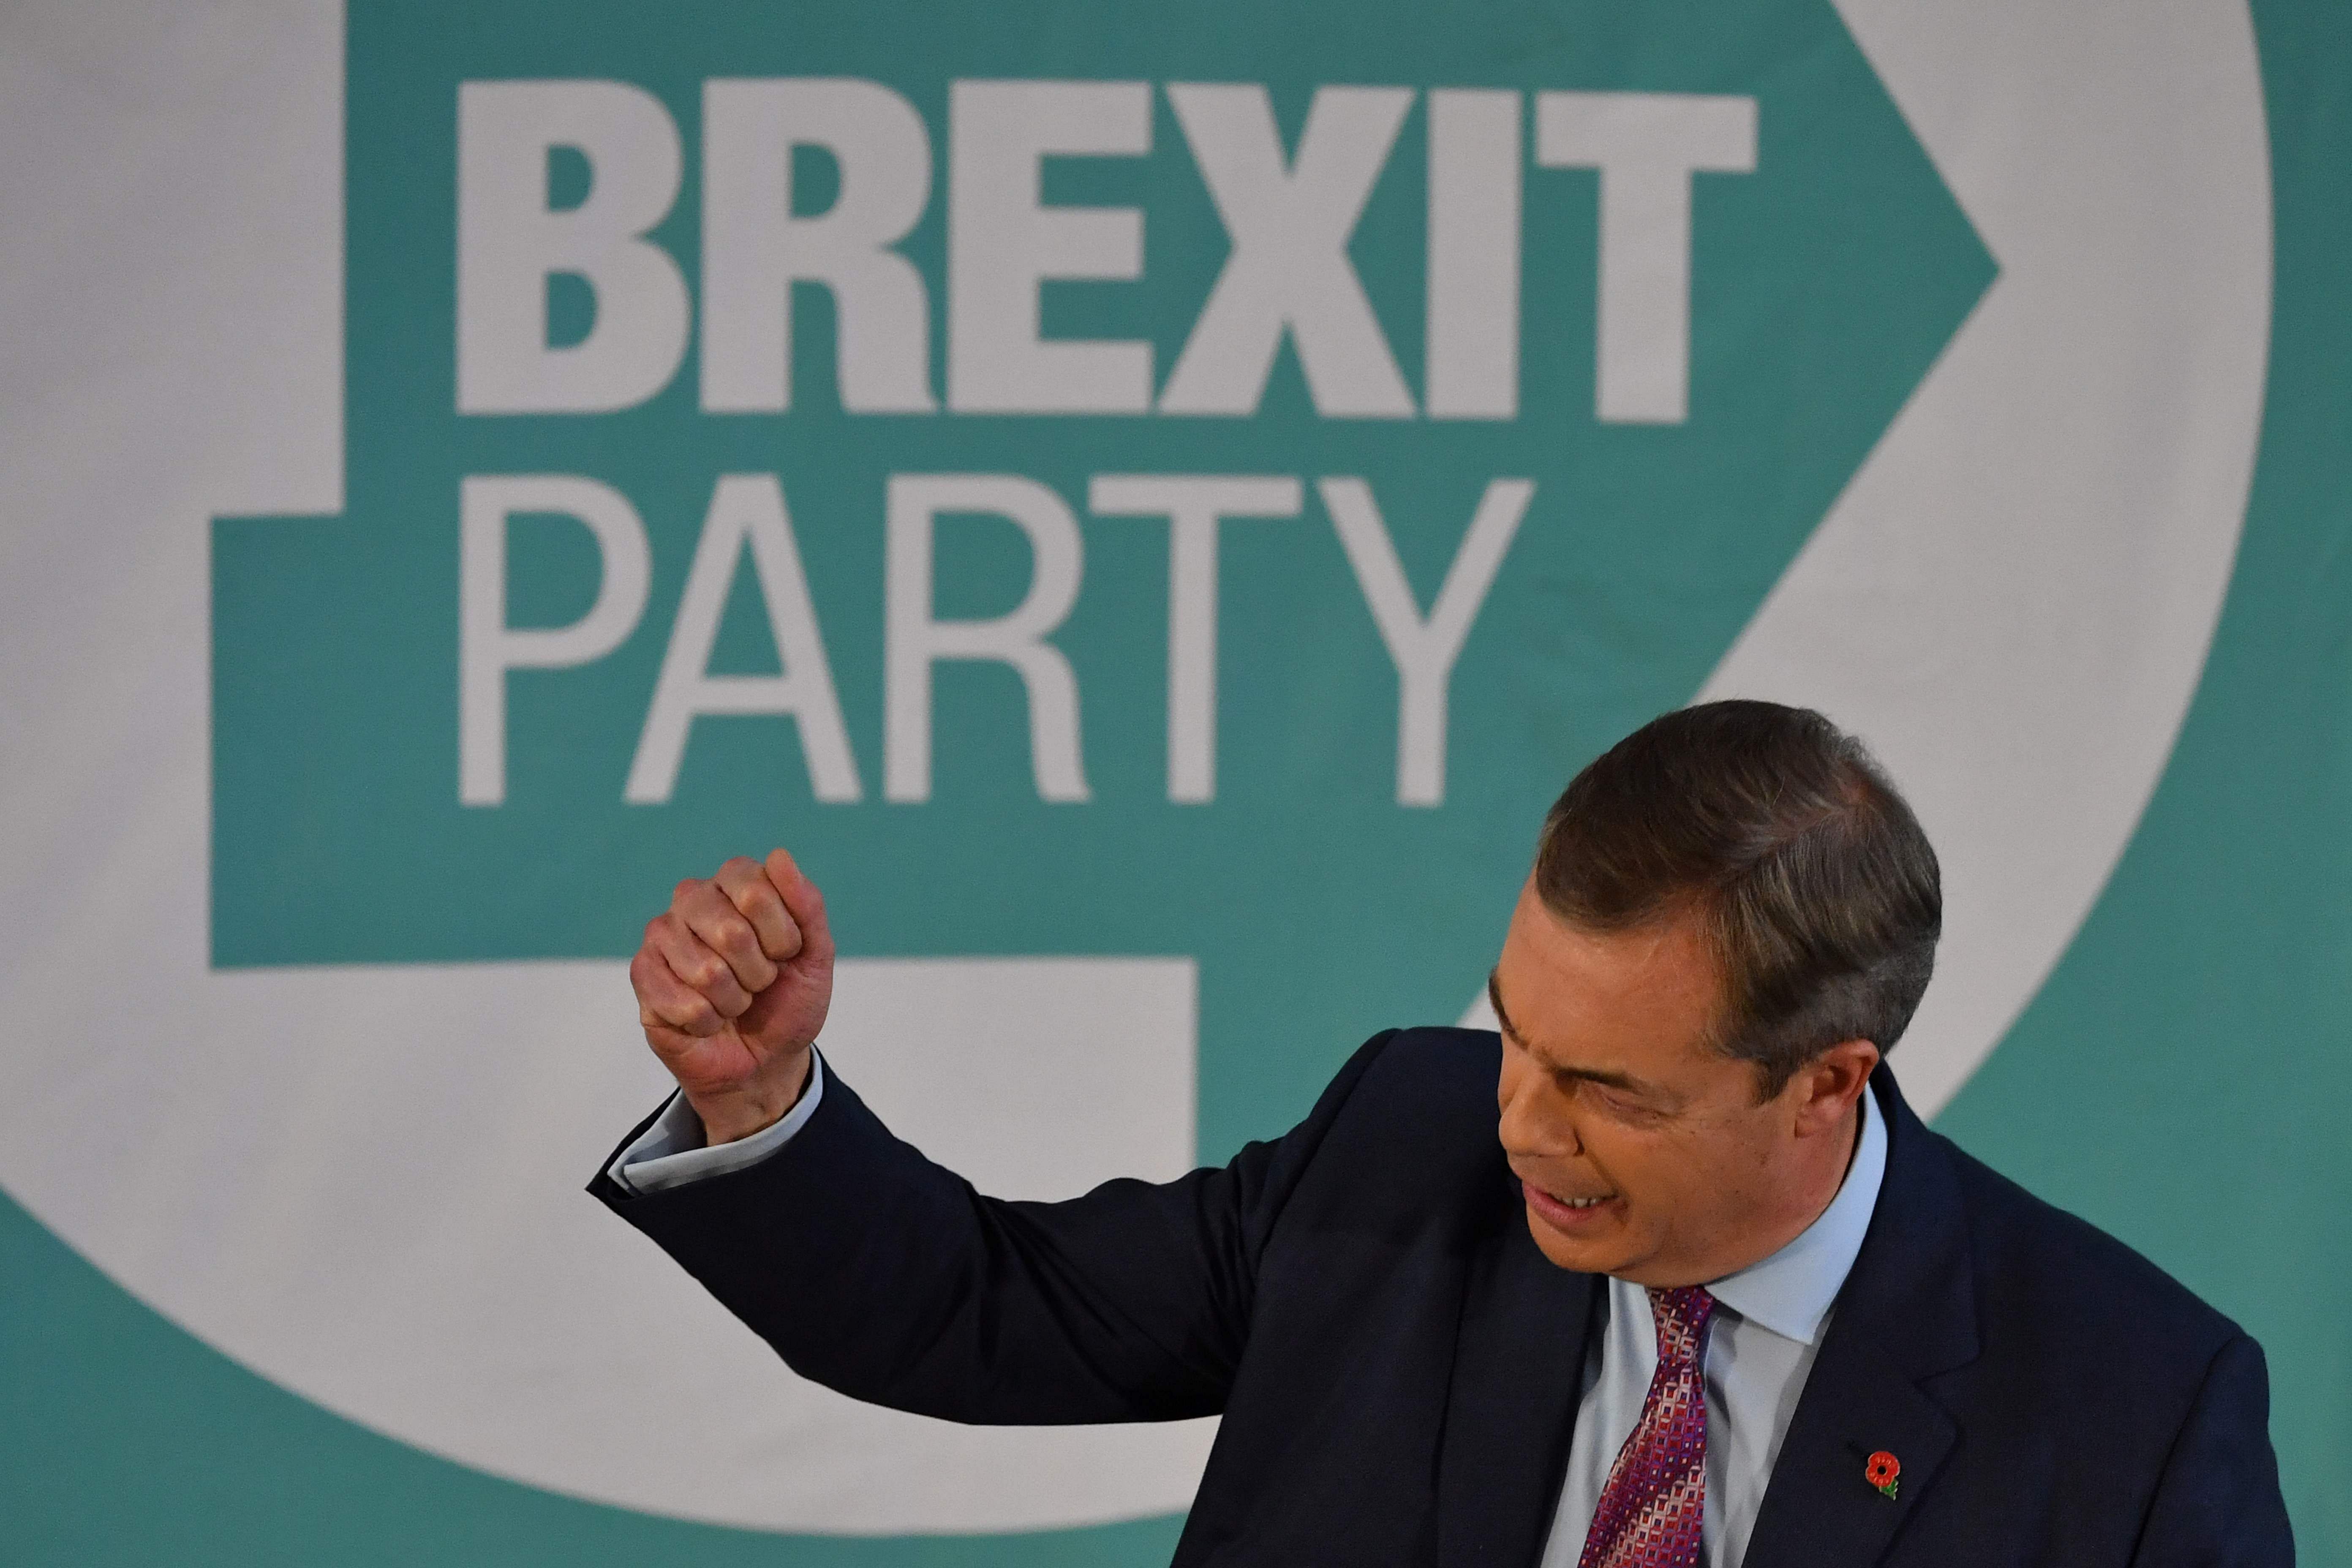 Brexit Party leader Nigel Farage gives a speech in Hartlepool, northeast England, on November 11, 2019 during a general election campaign visit. - Britain will go to the polls on December 12 to vote in a pre-Christmas general election. Farage said in the speech that he won't contest Tory-held seats during the election. (AFP Photo)